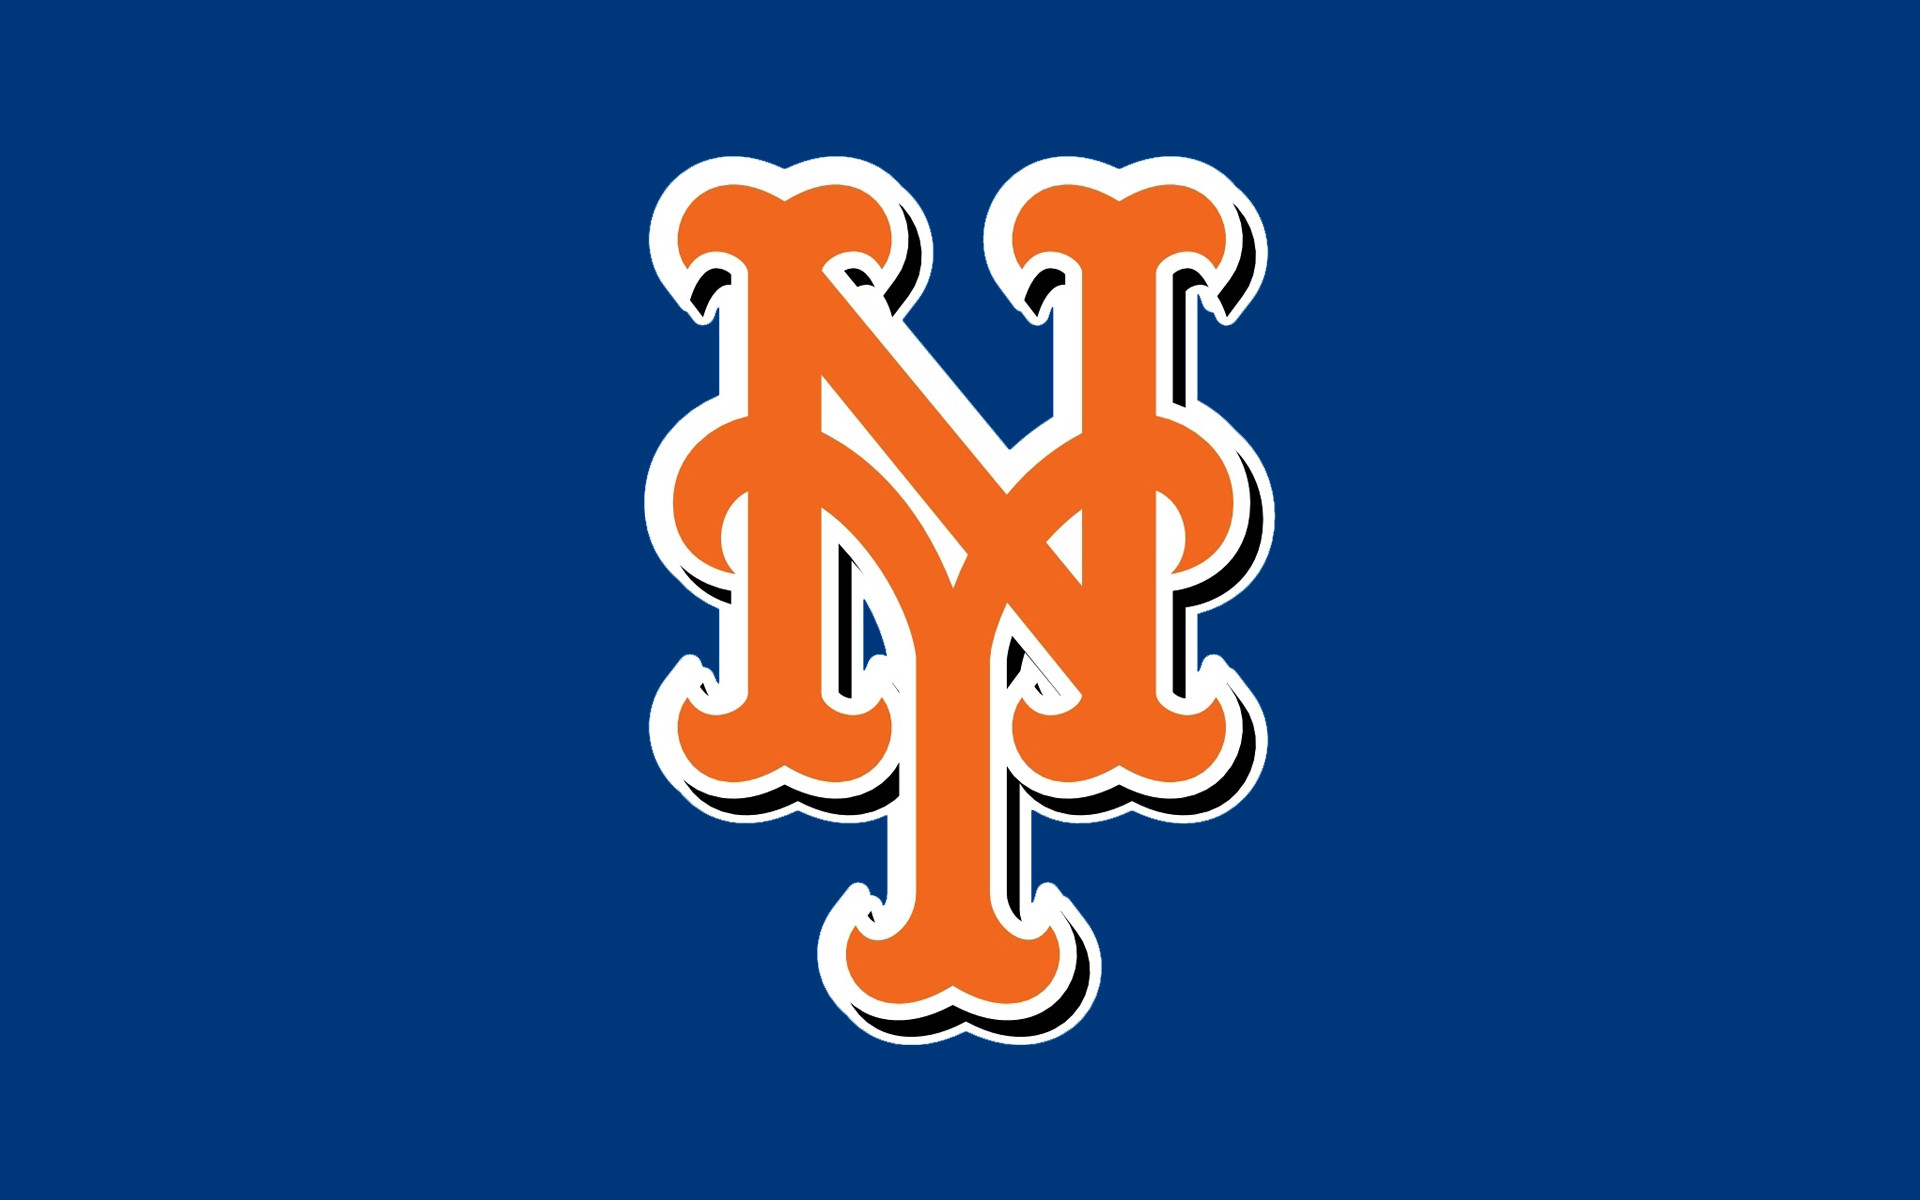 Download Image New York Mets Pc Android Iphone And - Logos And Uniforms Of The New York Mets - HD Wallpaper 